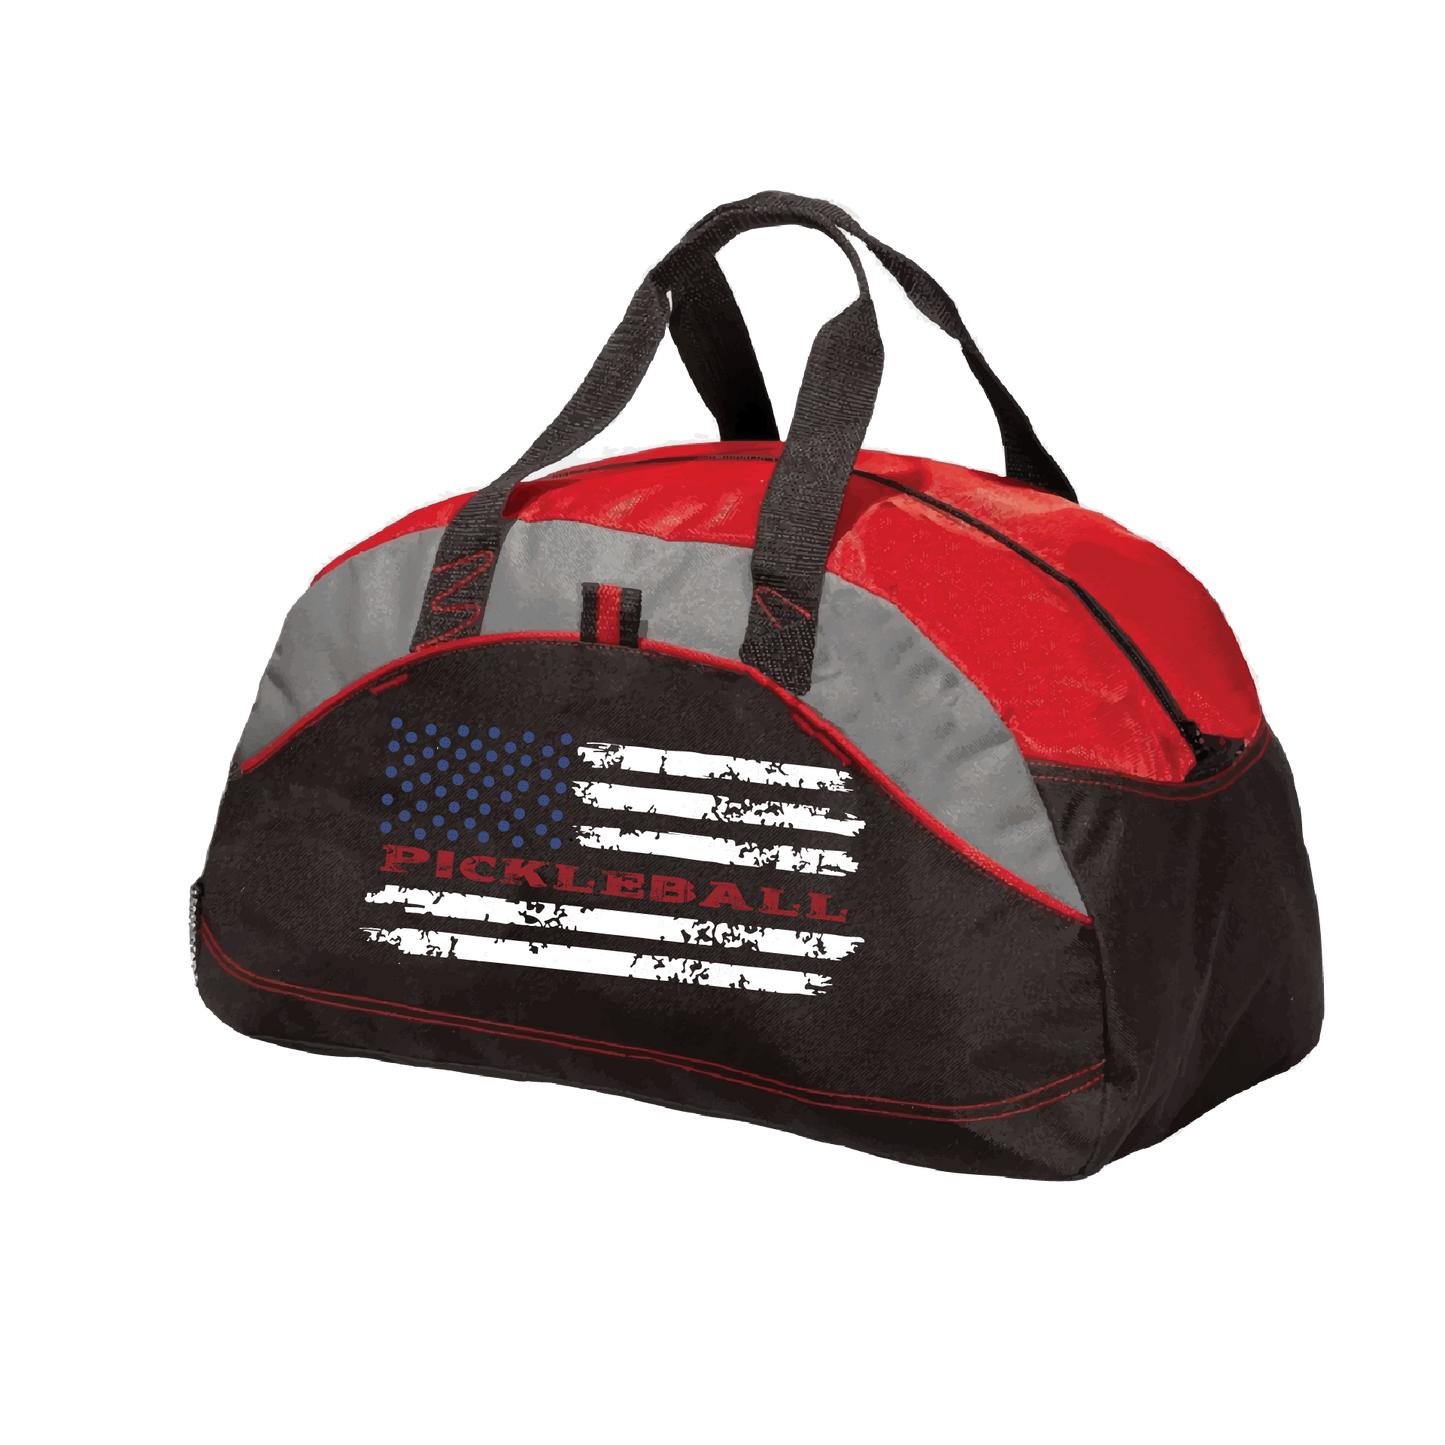 Pickleball Duffel Bag Design: Pickleball Flag  Carry your gear in comfort and style. This fun pickleball duffel bag is the perfect accessory for all pickleball players needing to keep their gear in one place. This medium sized duffel tote is ideal for all your pickleball activities. The large center compartment allows for plenty of space and the mesh end pocket is perfect for holding a water bottle. 